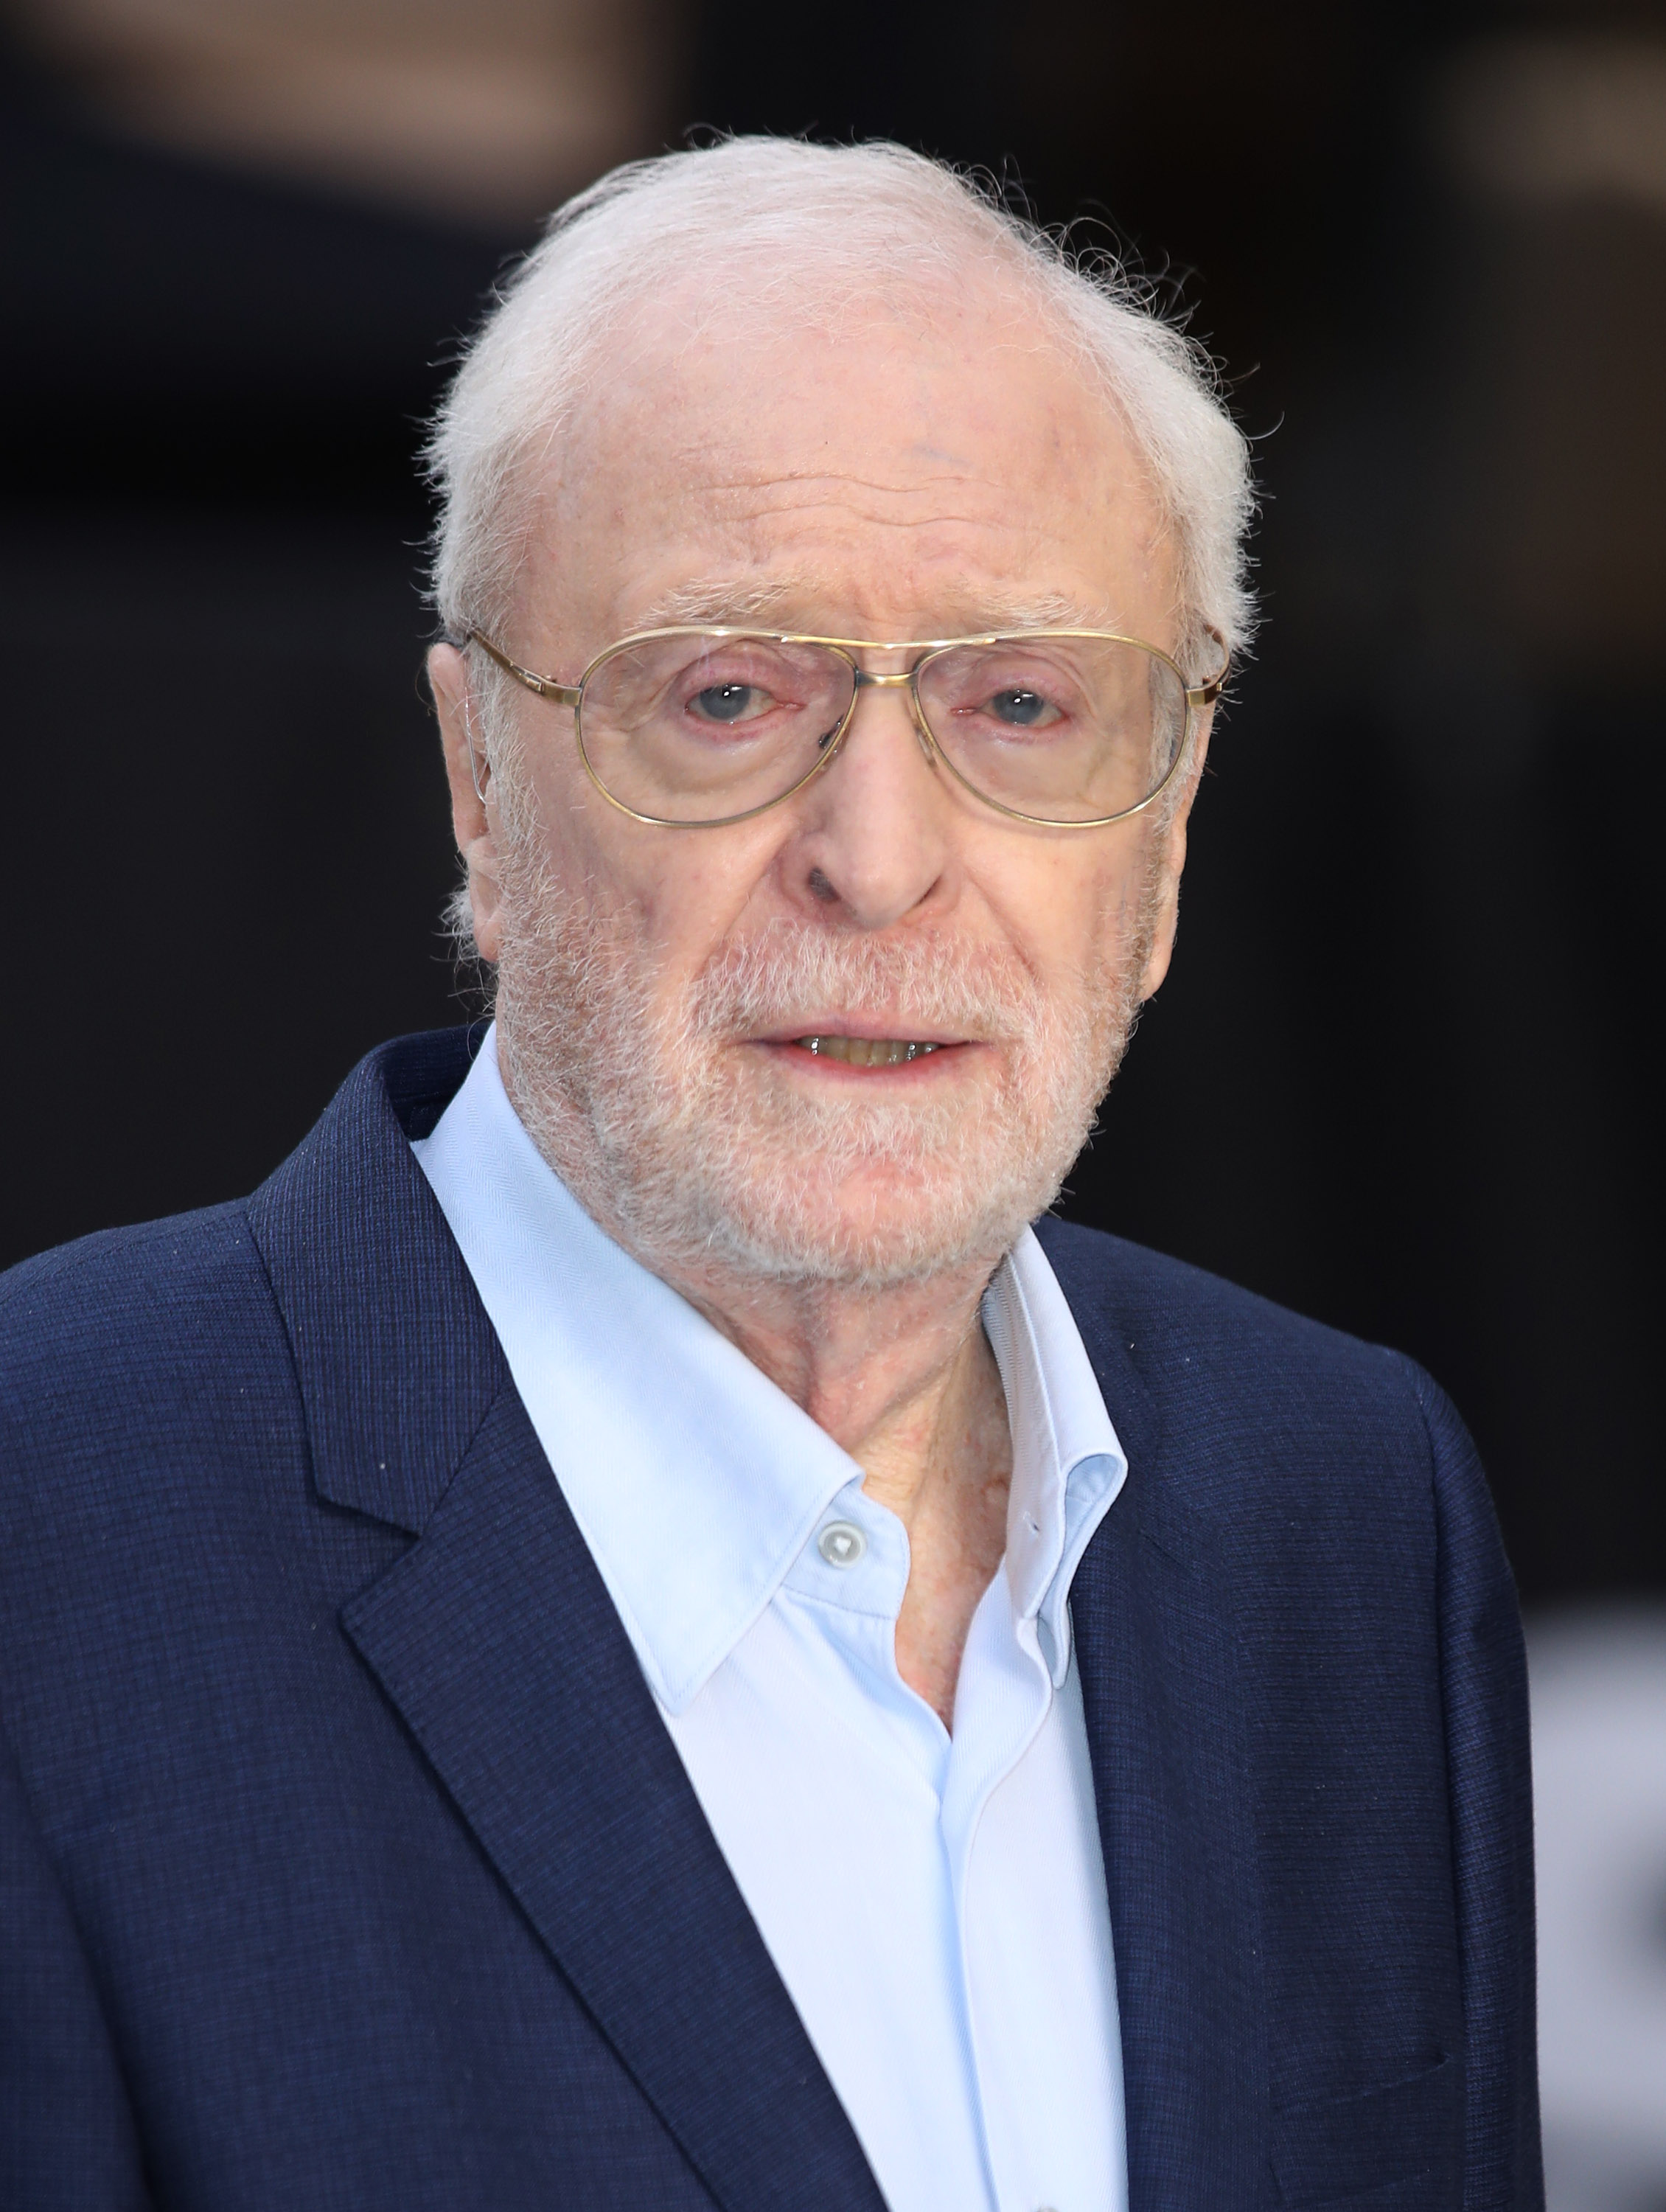 Michael Caine at the world premiere of "King Of Thieves,'" 2018 | Source: Getty Images